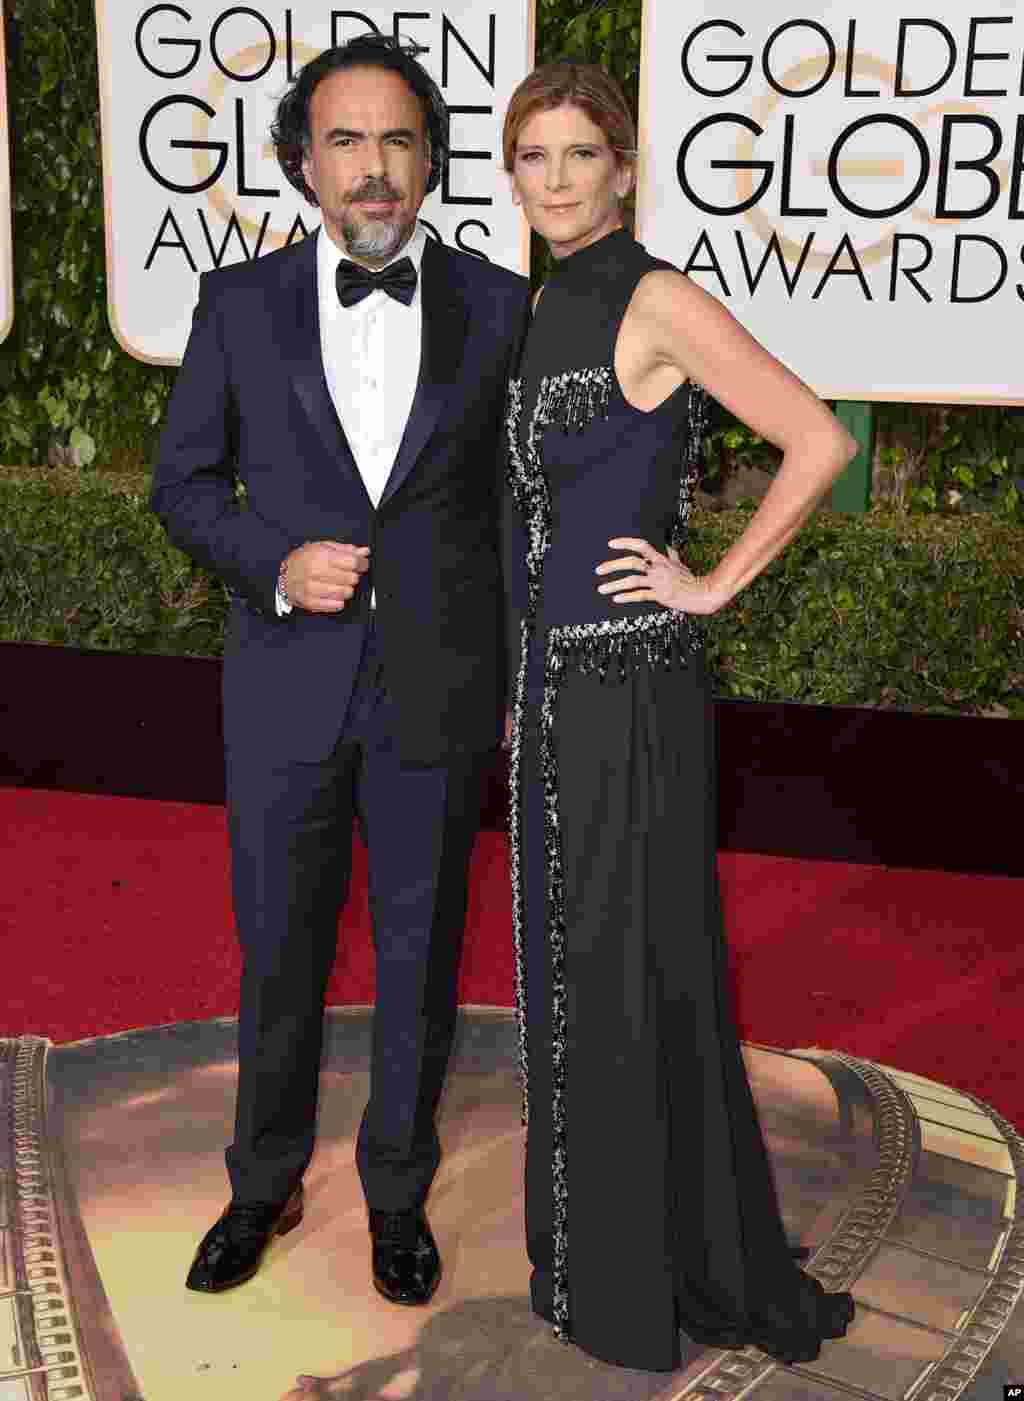 Alejandro Gonzalez Inarritu, left, and Maria Eladia Hagerman arrive at the 73rd annual Golden Globe Awards on Jan. 10, 2016, at the Beverly Hilton Hotel in Beverly Hills, Calif. 